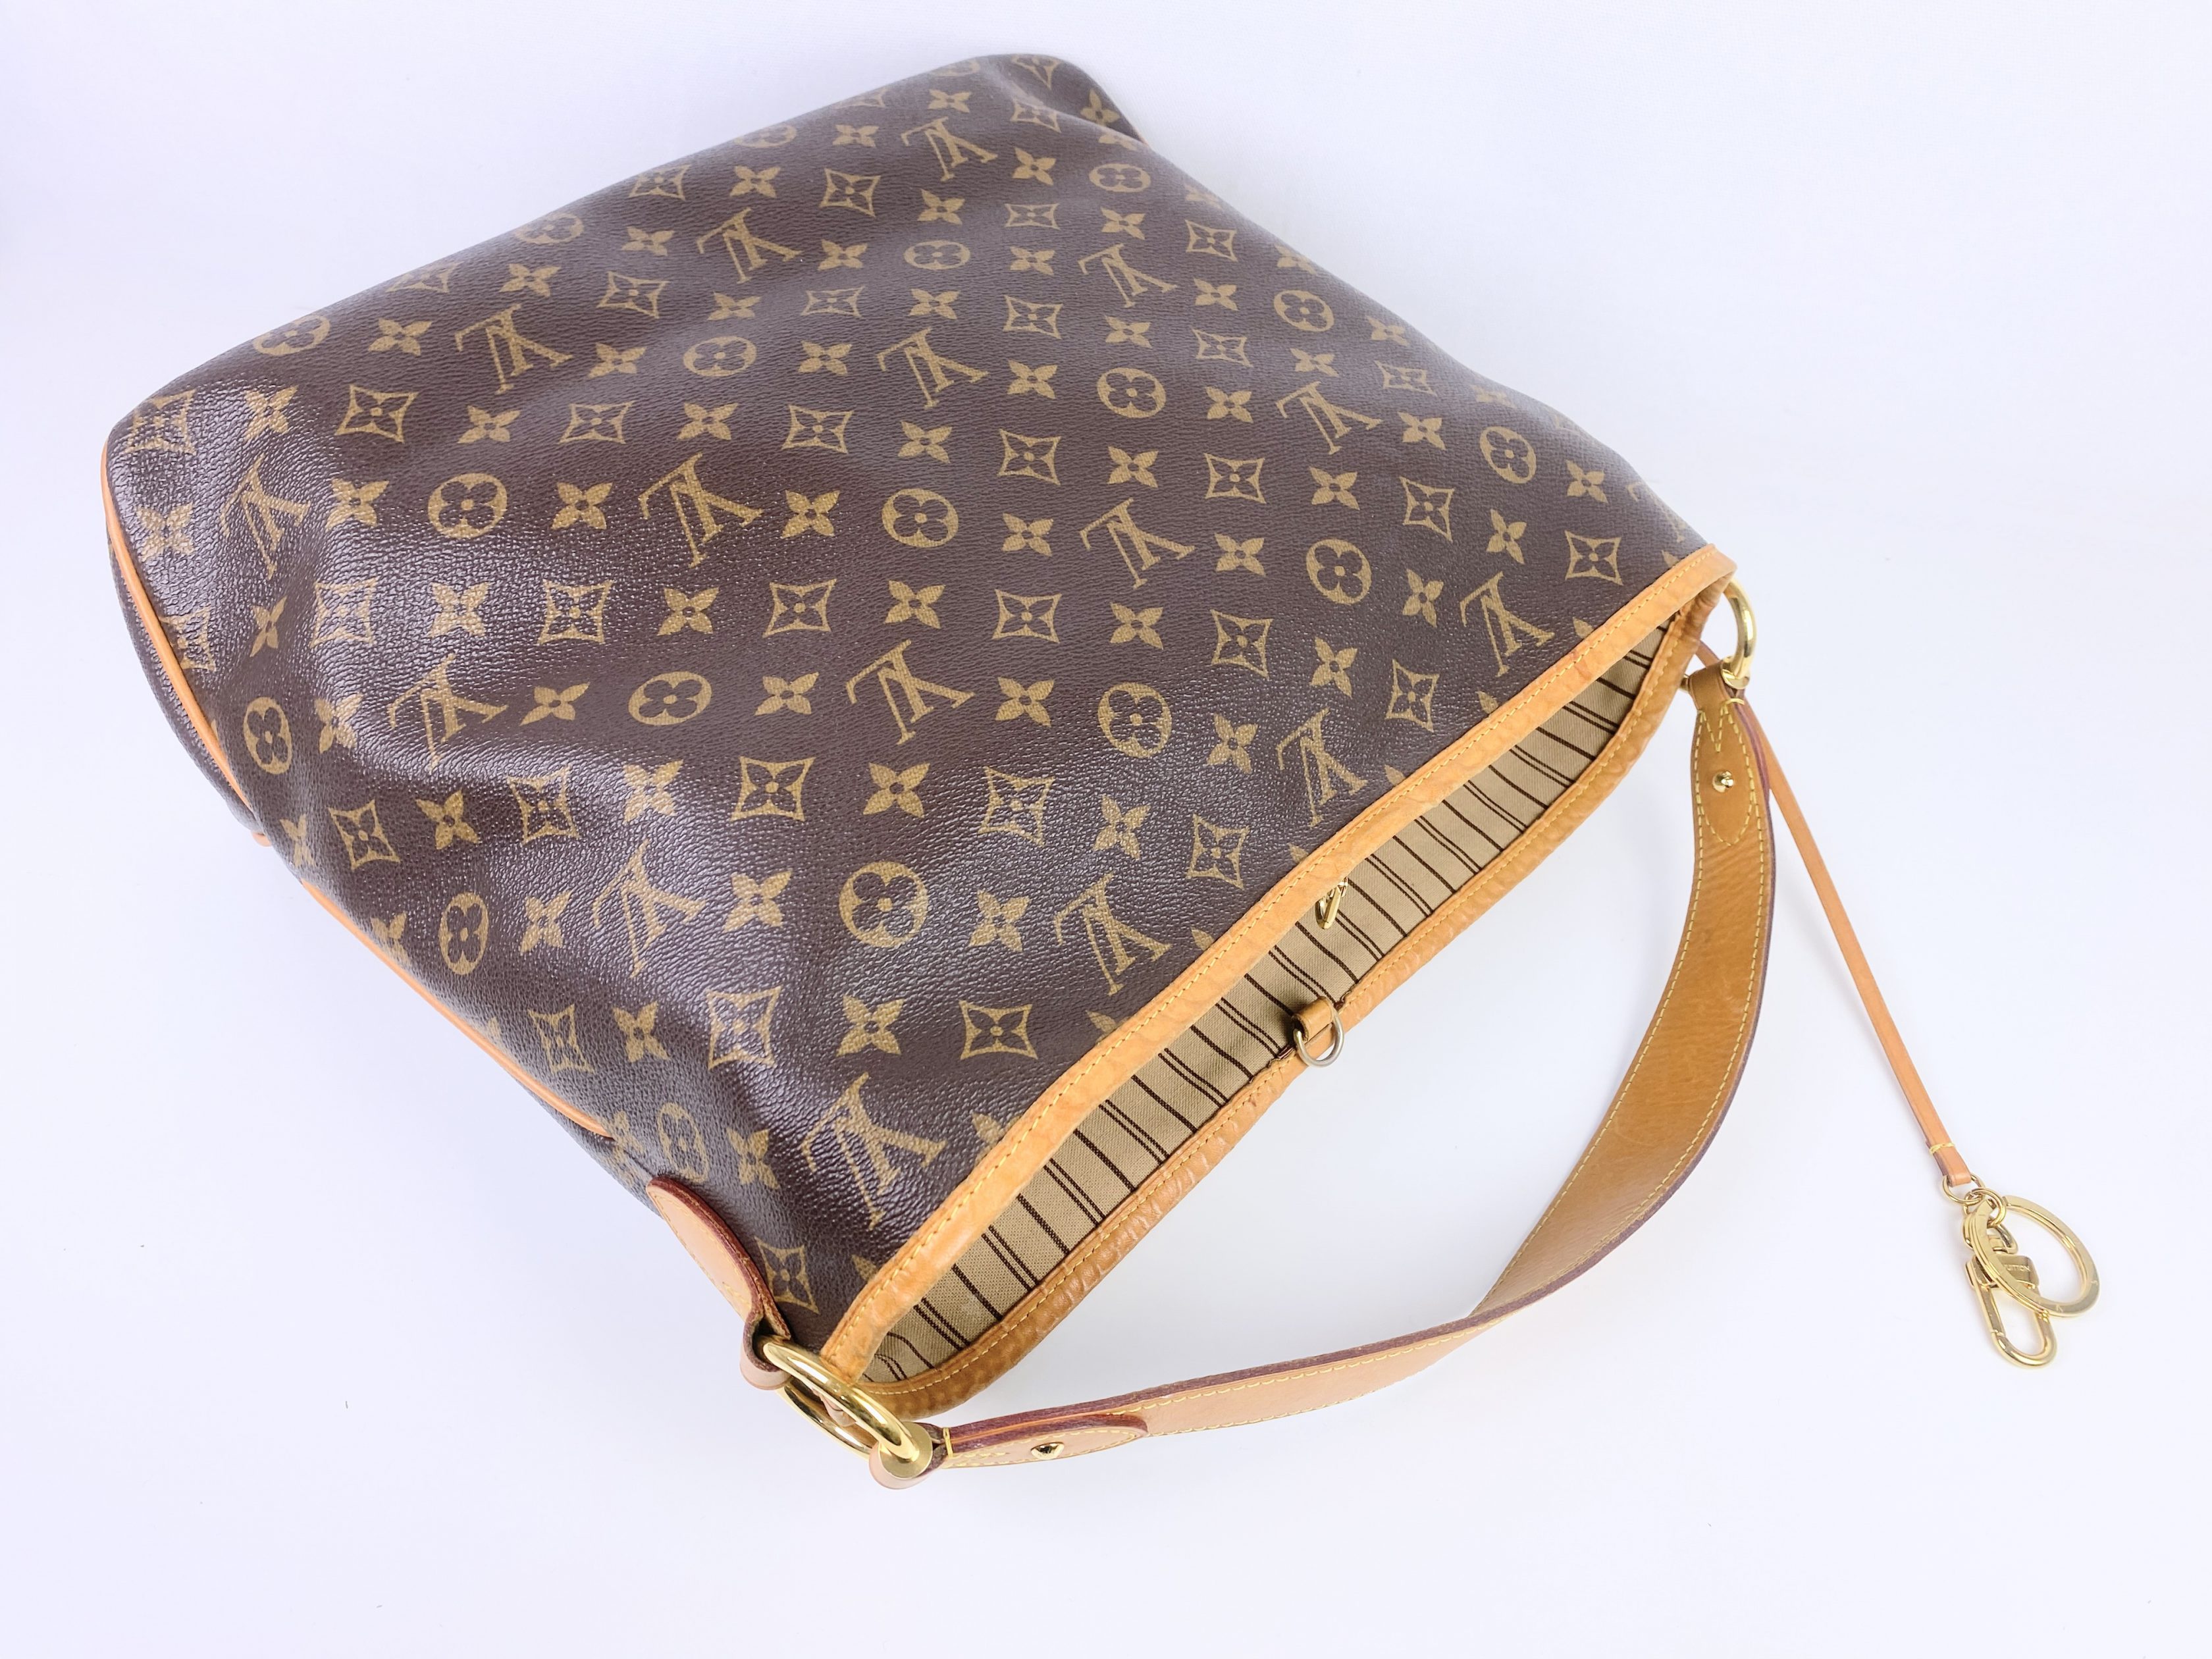 louis vuitton delightful mm discontinued